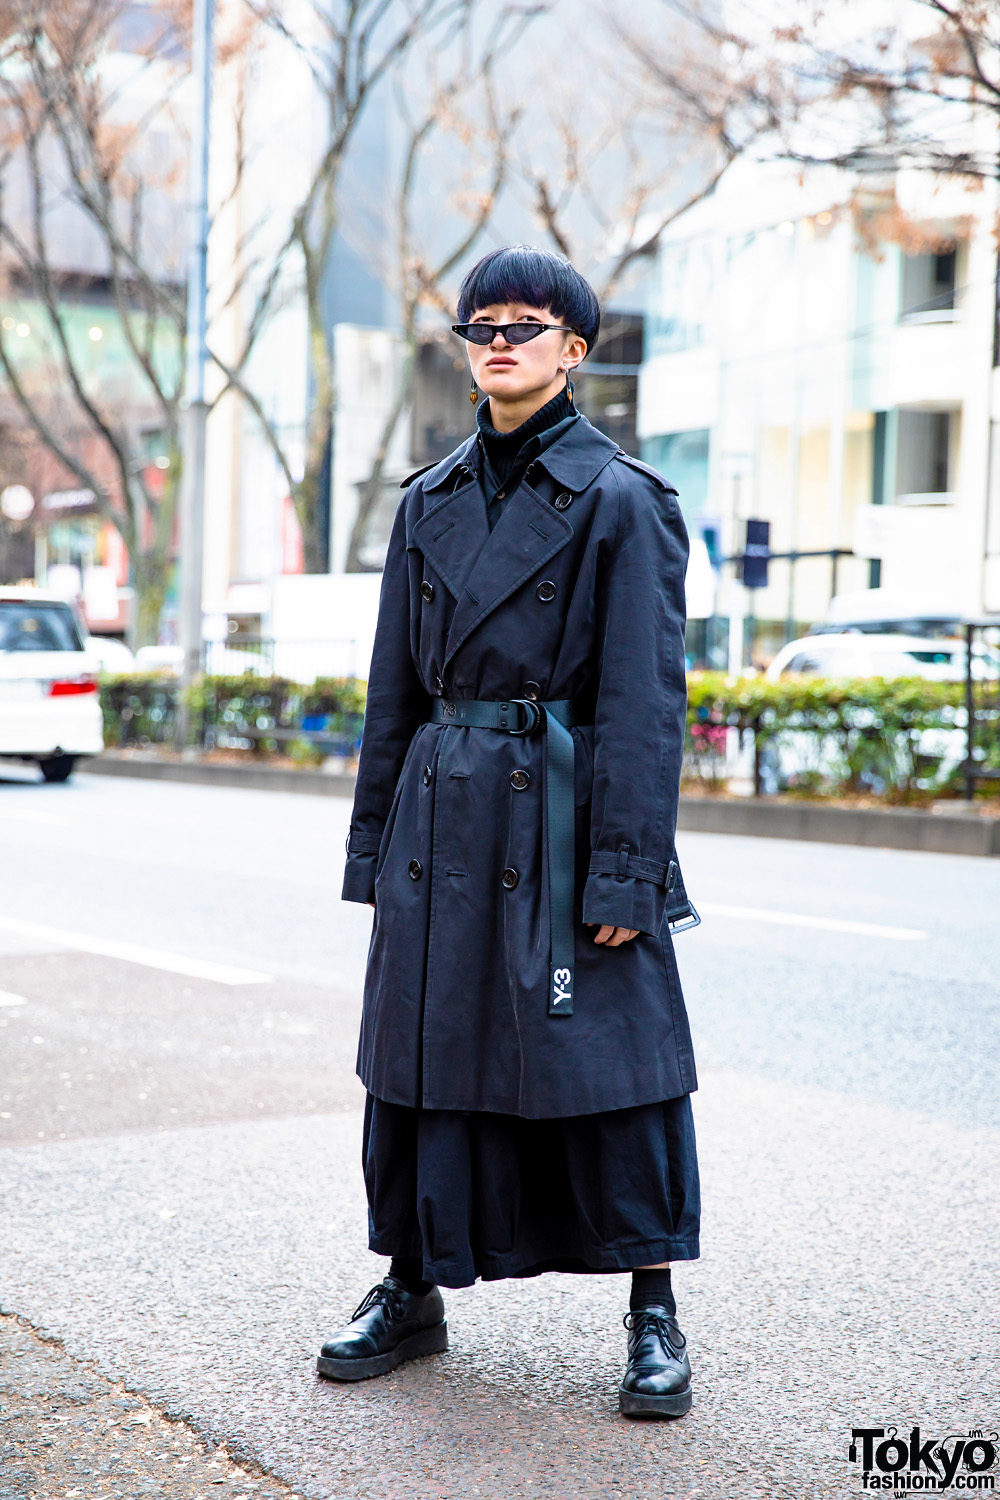 All Black Men's Winter Street Style w/ Burberry Trench Coat, Y-3